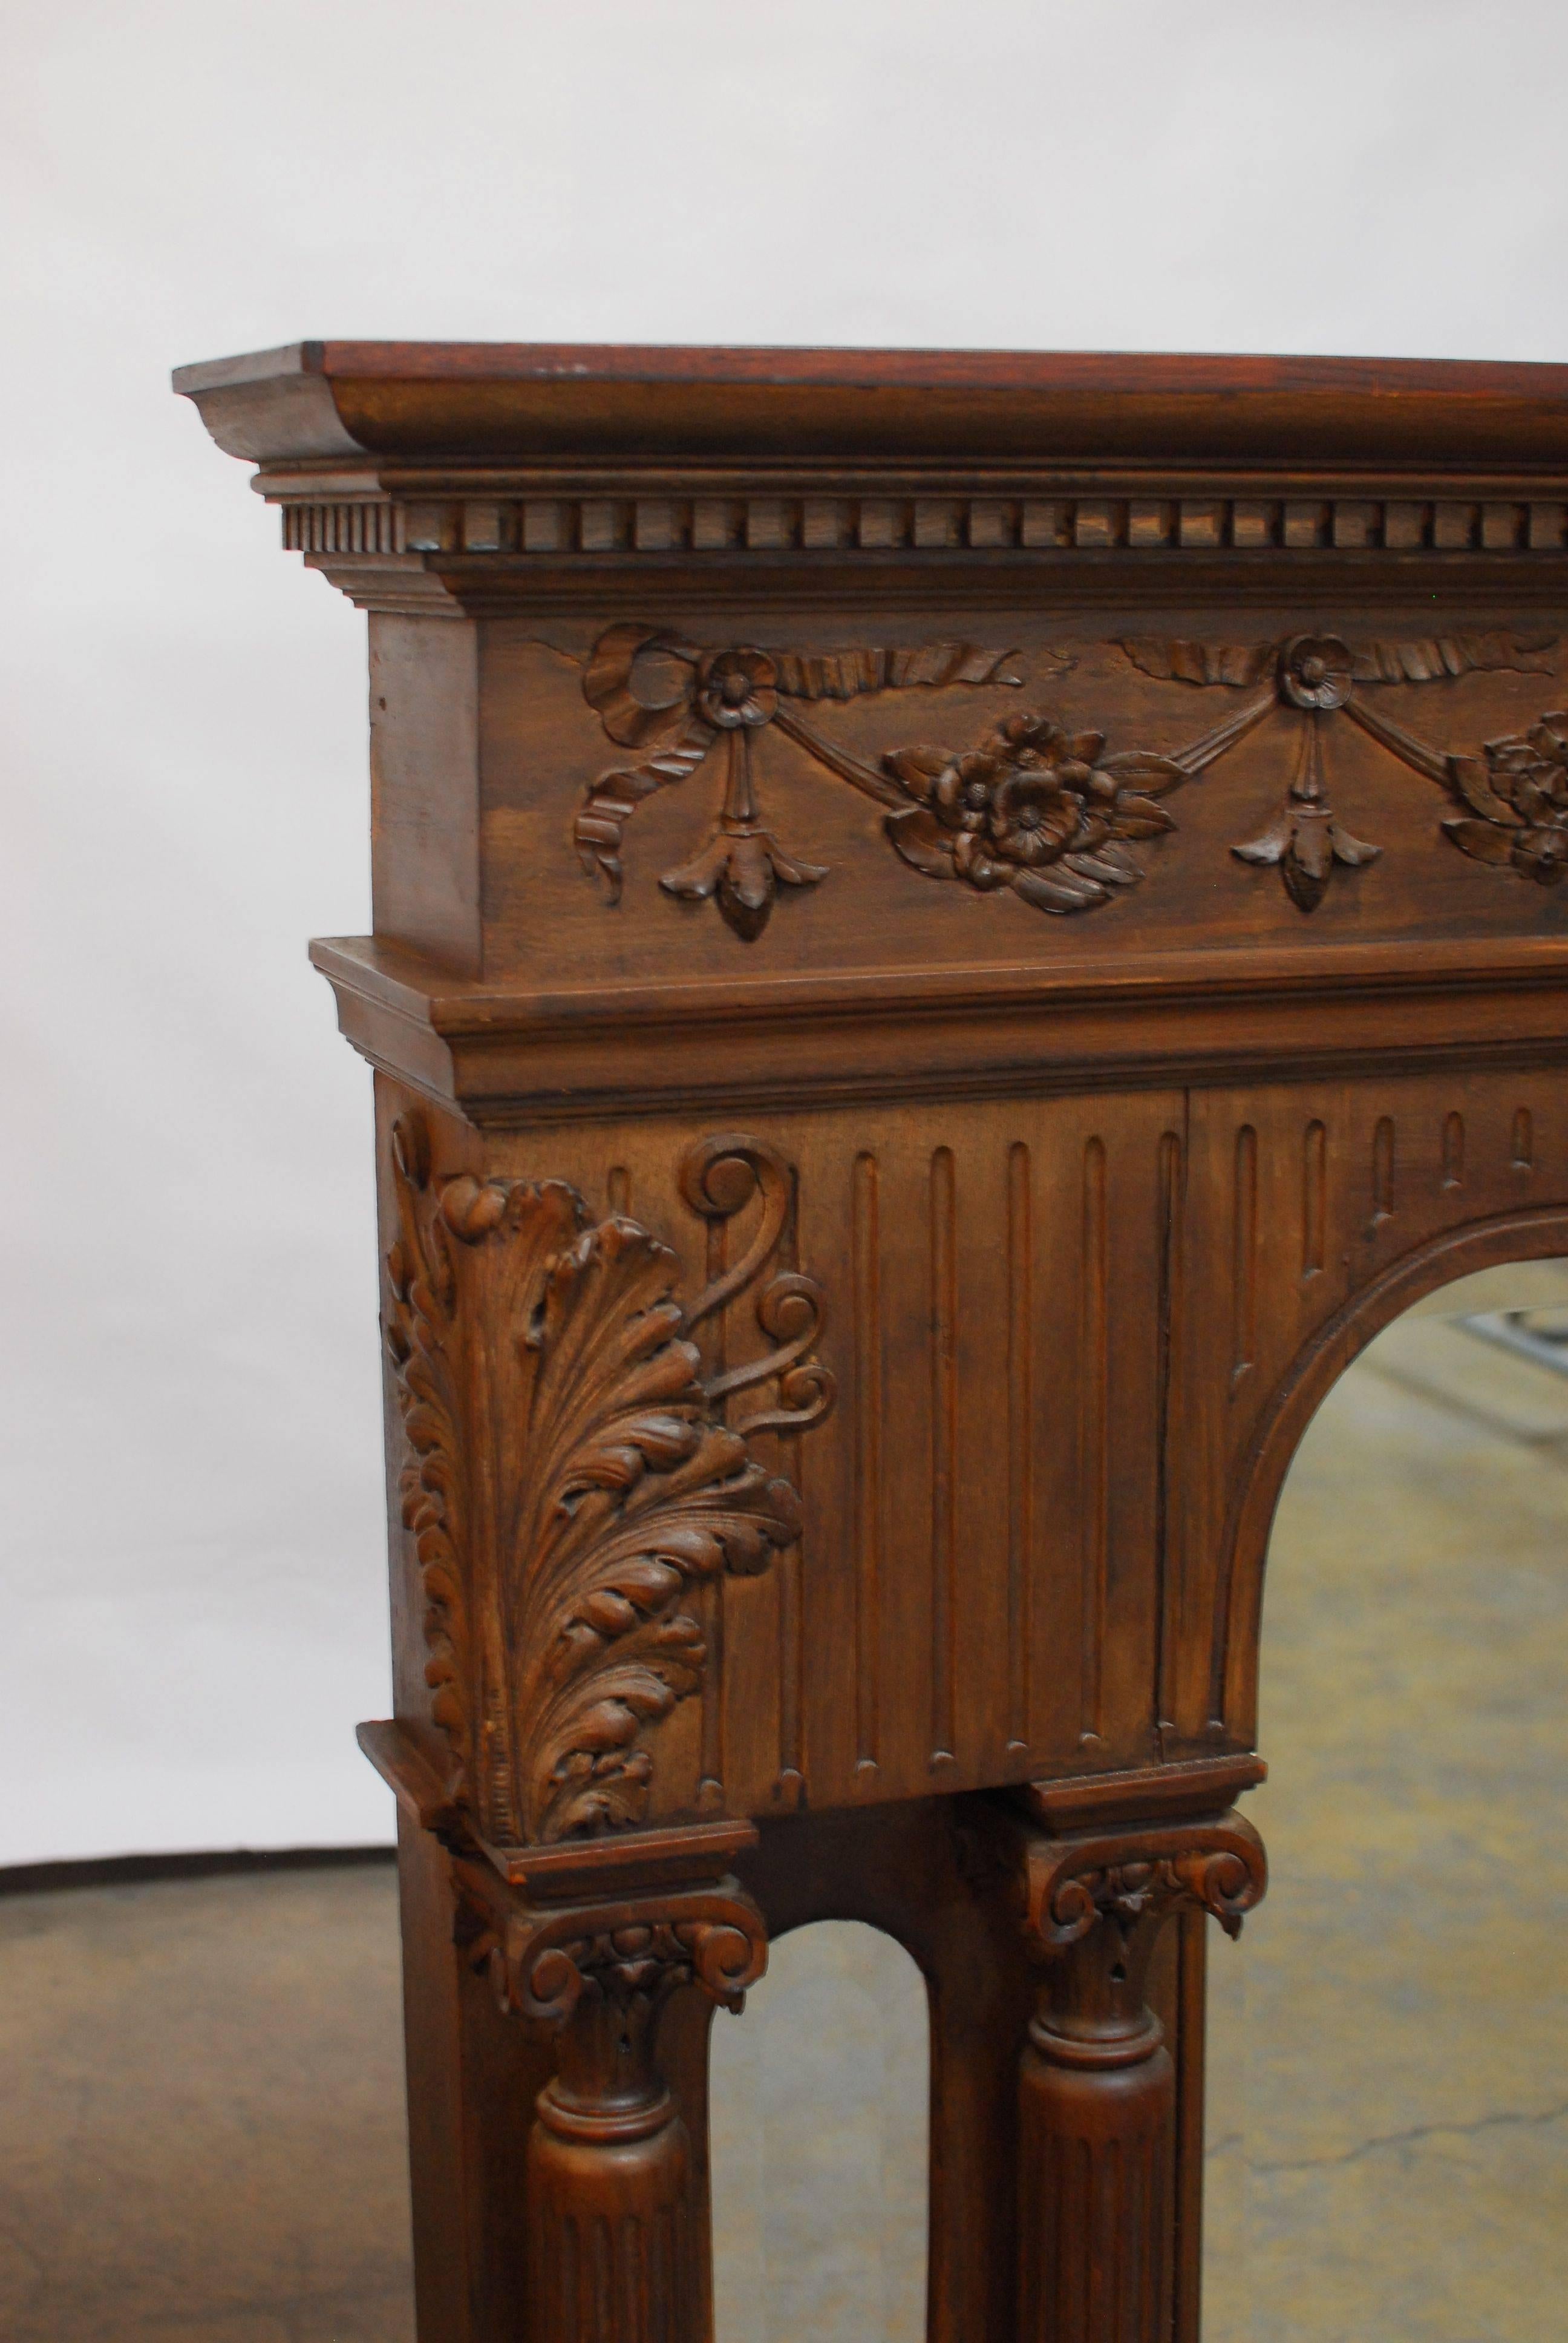 Highly carved Victorian over mantle mirror featuring four Neoclassical style corinthian columns. Two arched mirrors flanked by one larger arched center mirror all having beveled glass. The mirrors are surmounted by a large cornice shelf with